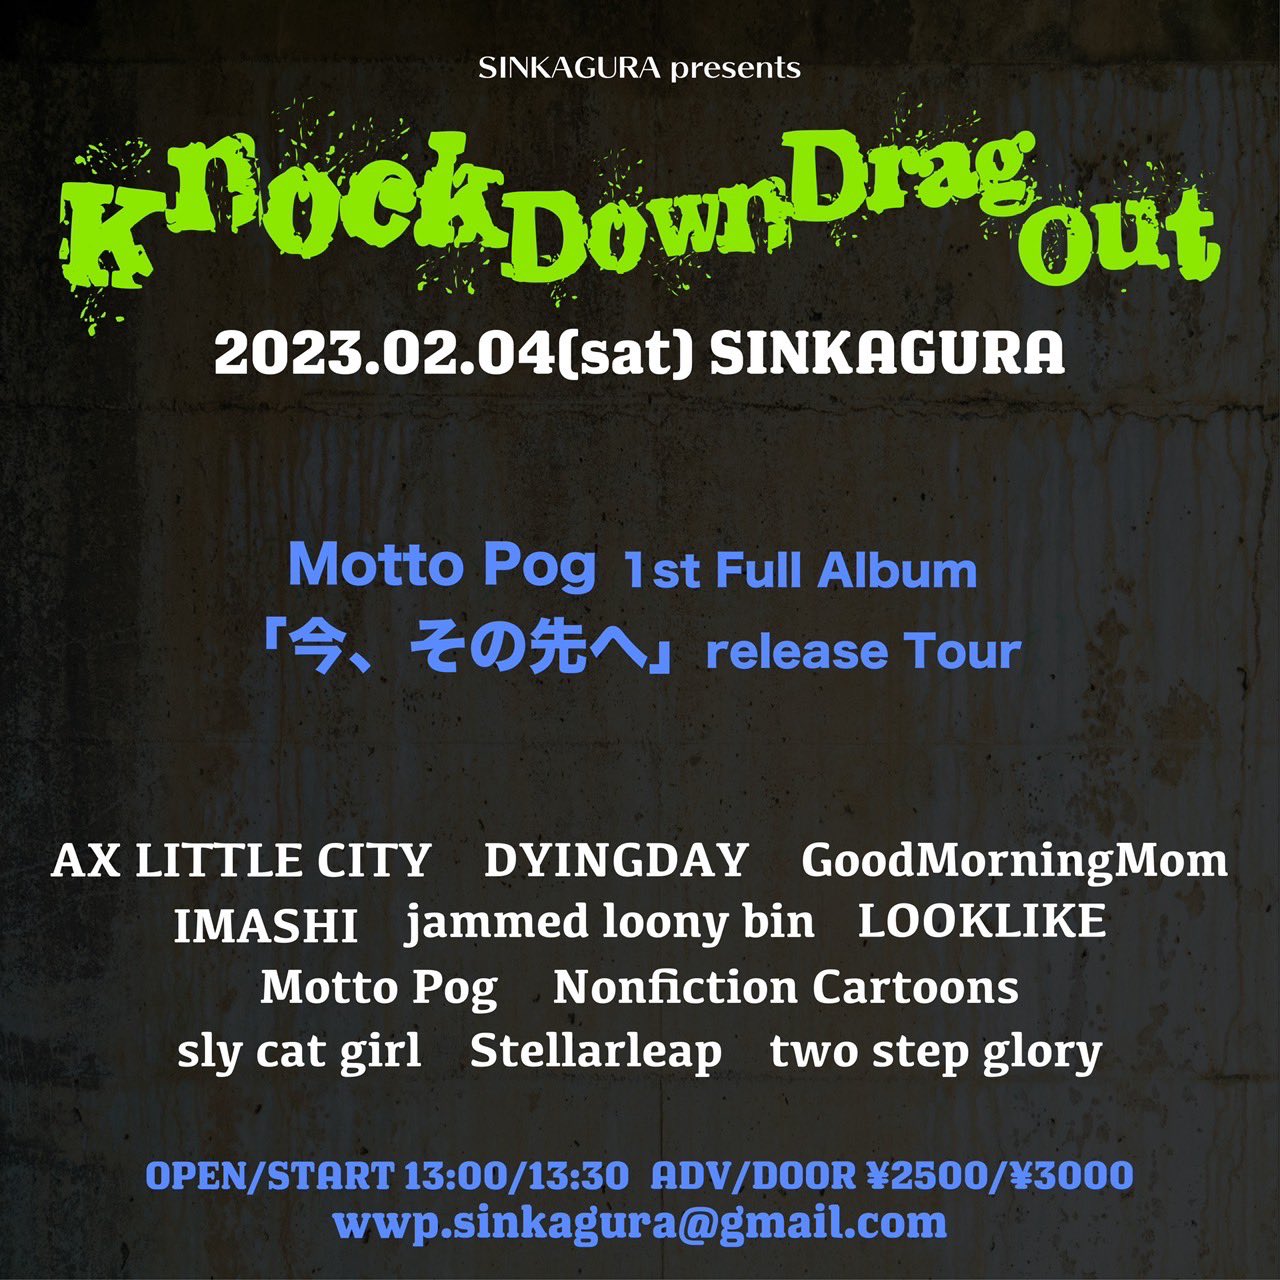 「Knock Down Drag Out」